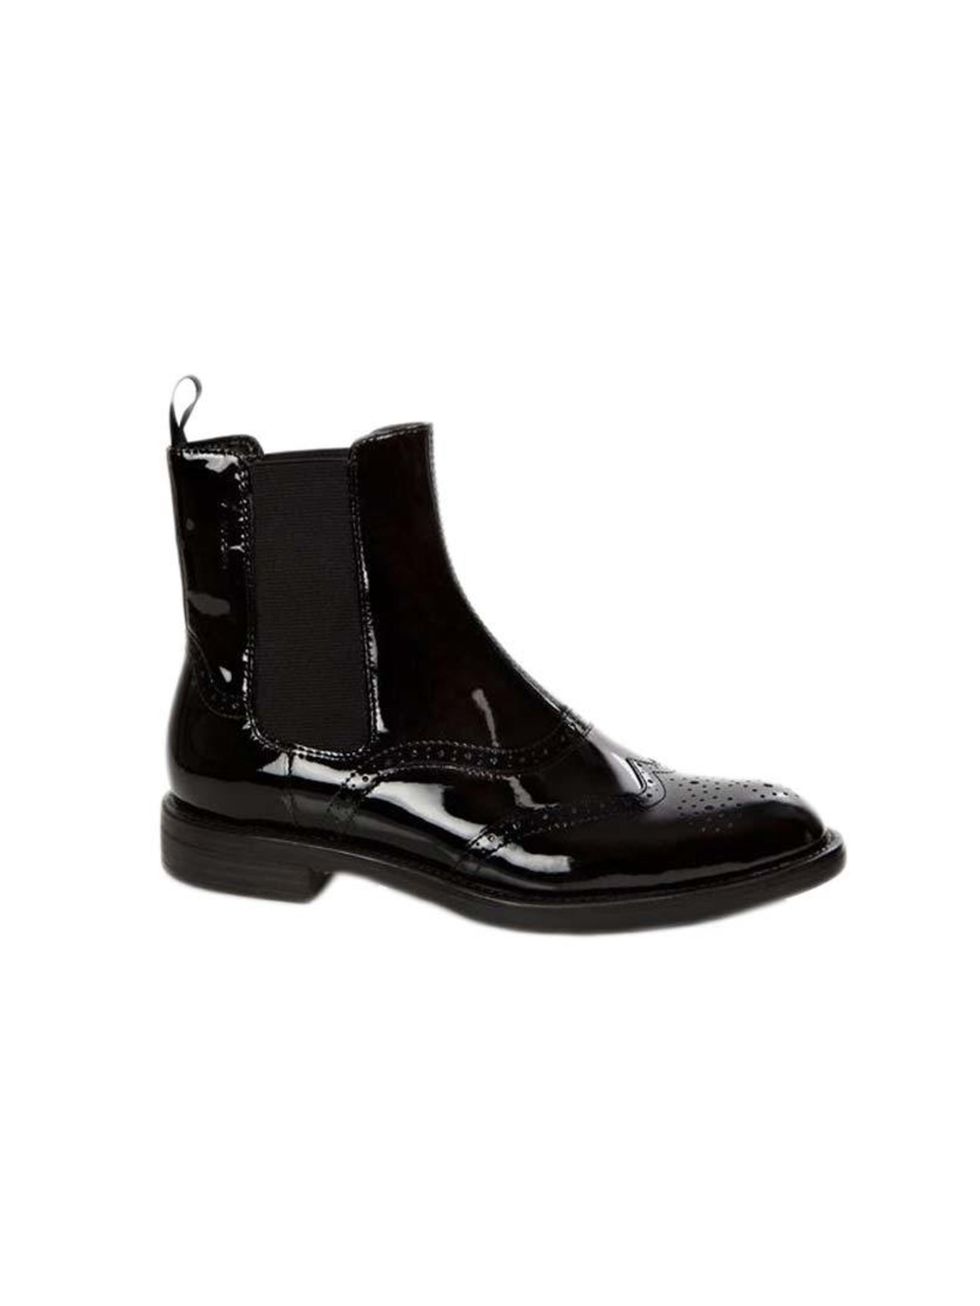 <p>Acting Features Assistant Maybelle Morgan has found the perfect ankle boot for autumn.</p>

<p> </p>

<p><a href="http://www.vagabond.com/en/AMINA-3803-060-20/" target="_blank">Vagabond</a> boots, £95</p>